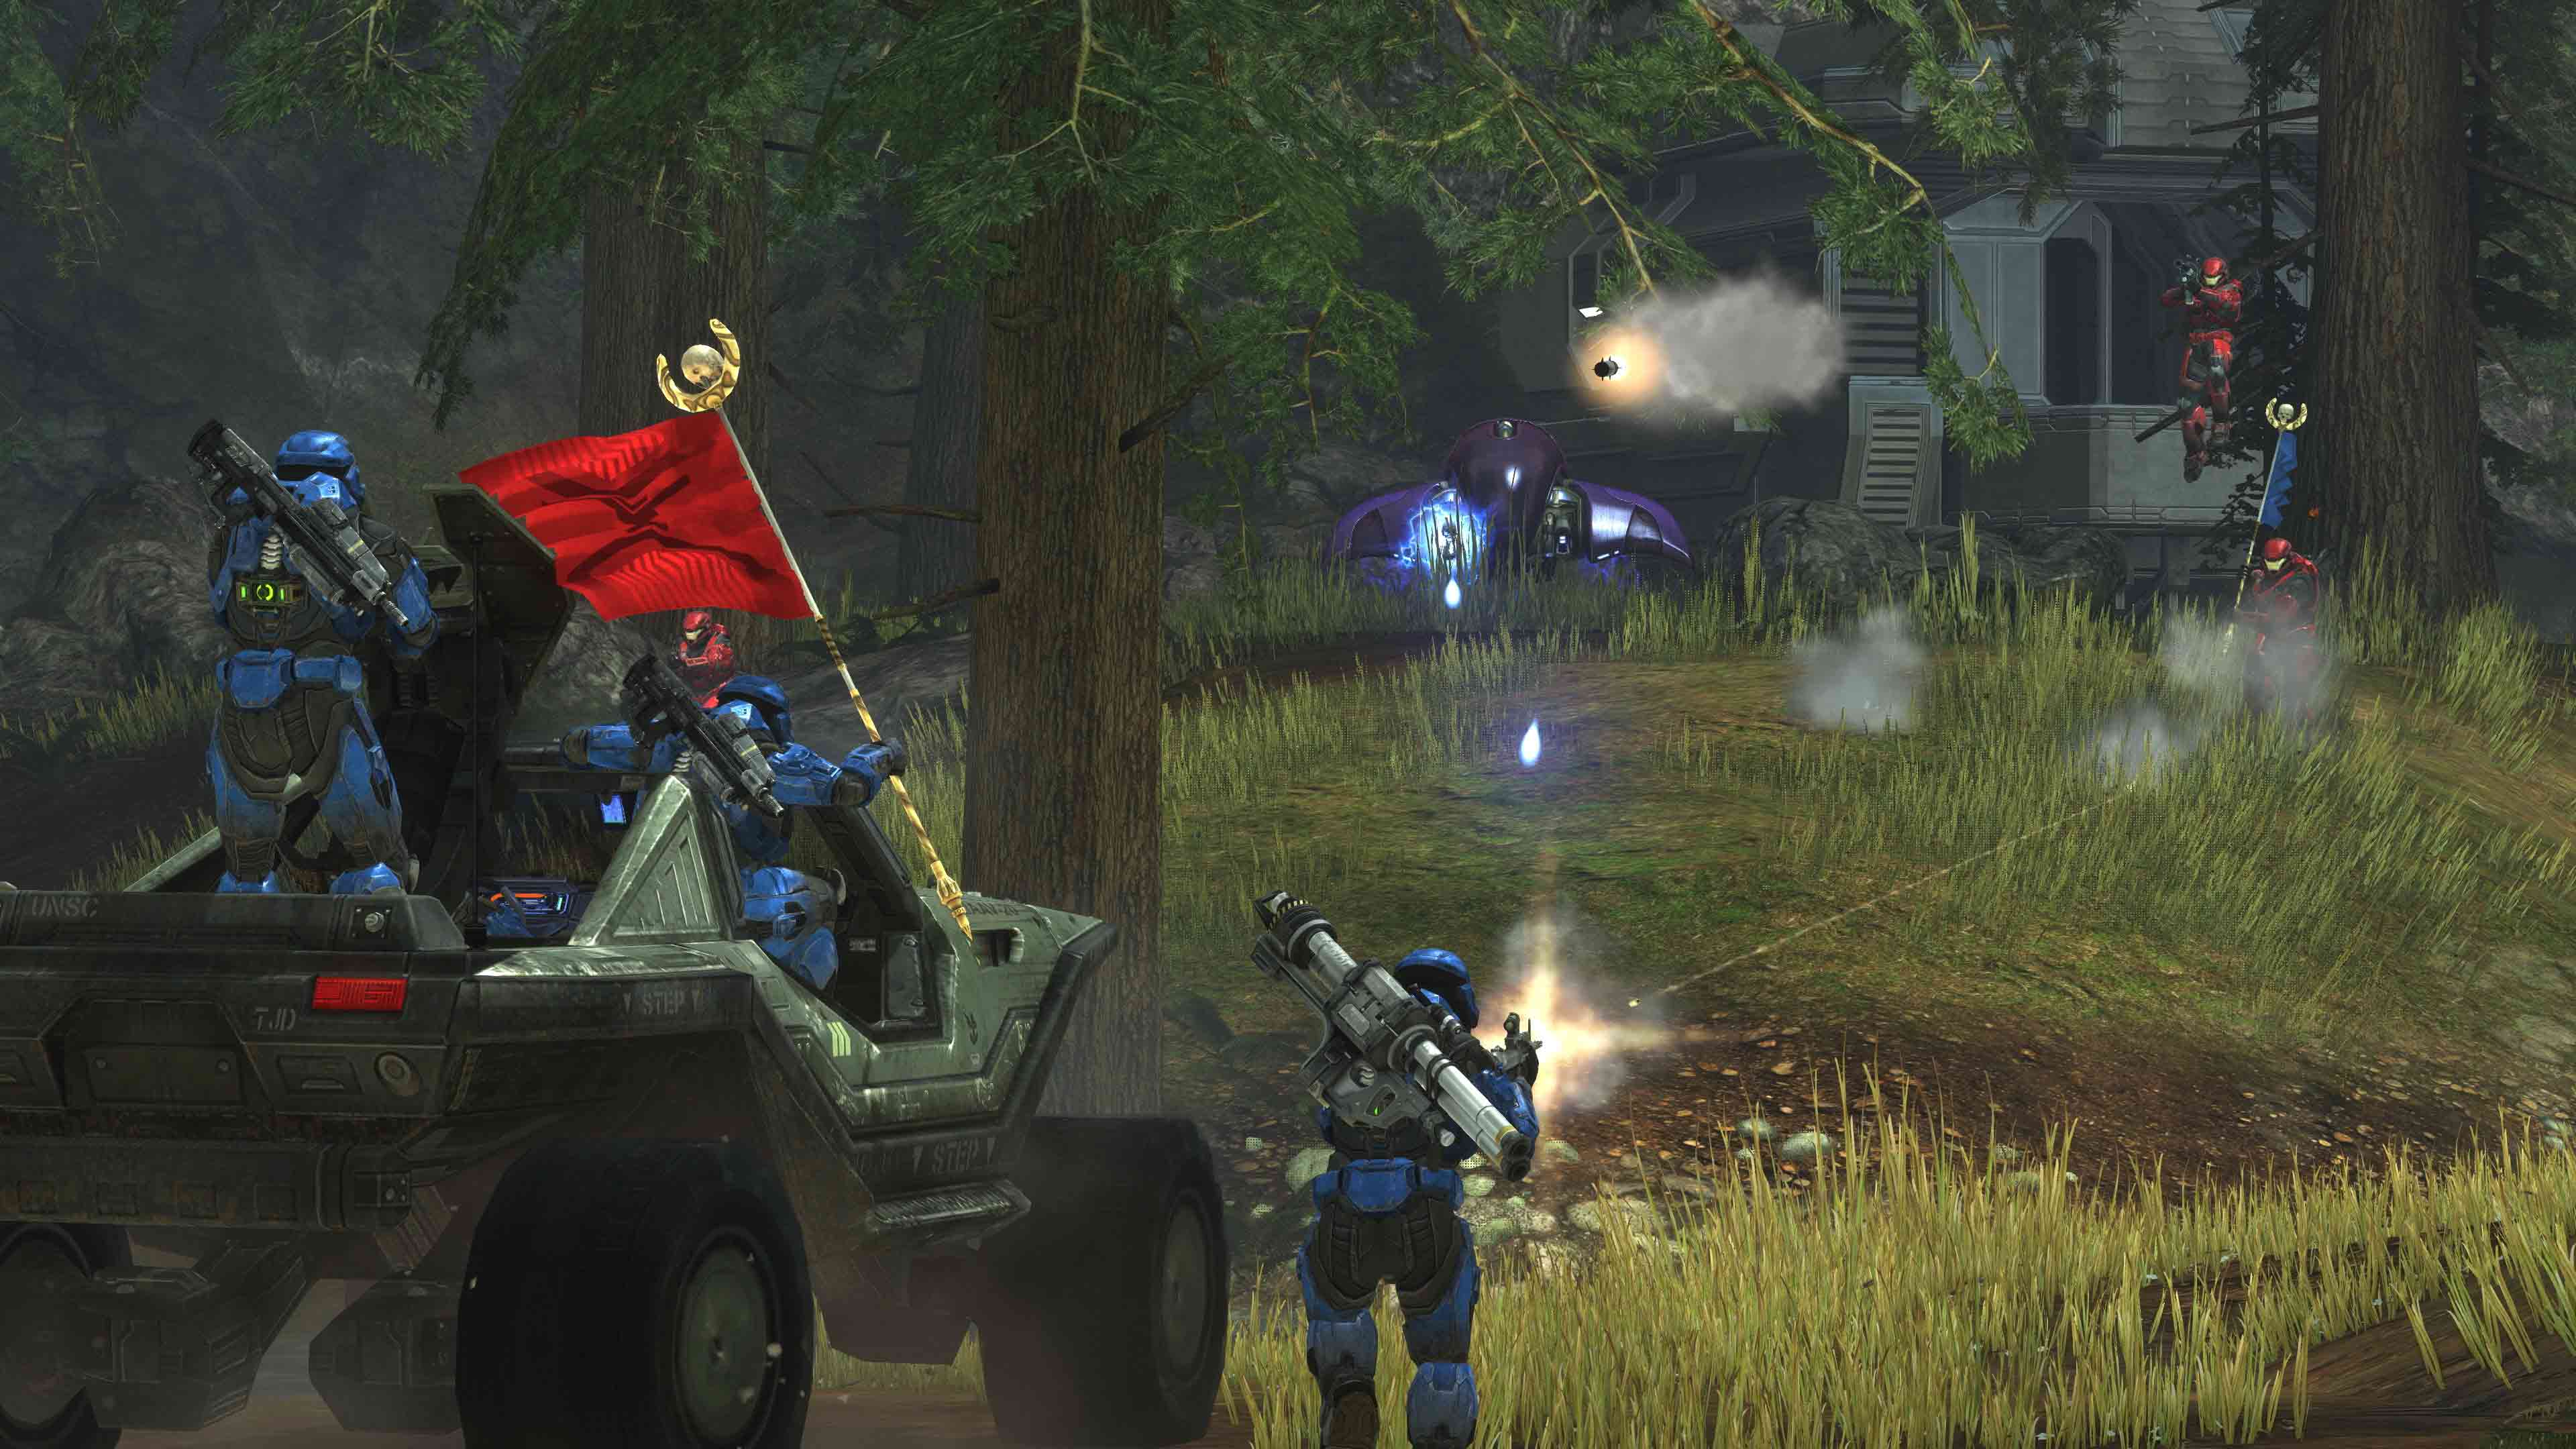 release date for halo games on pc